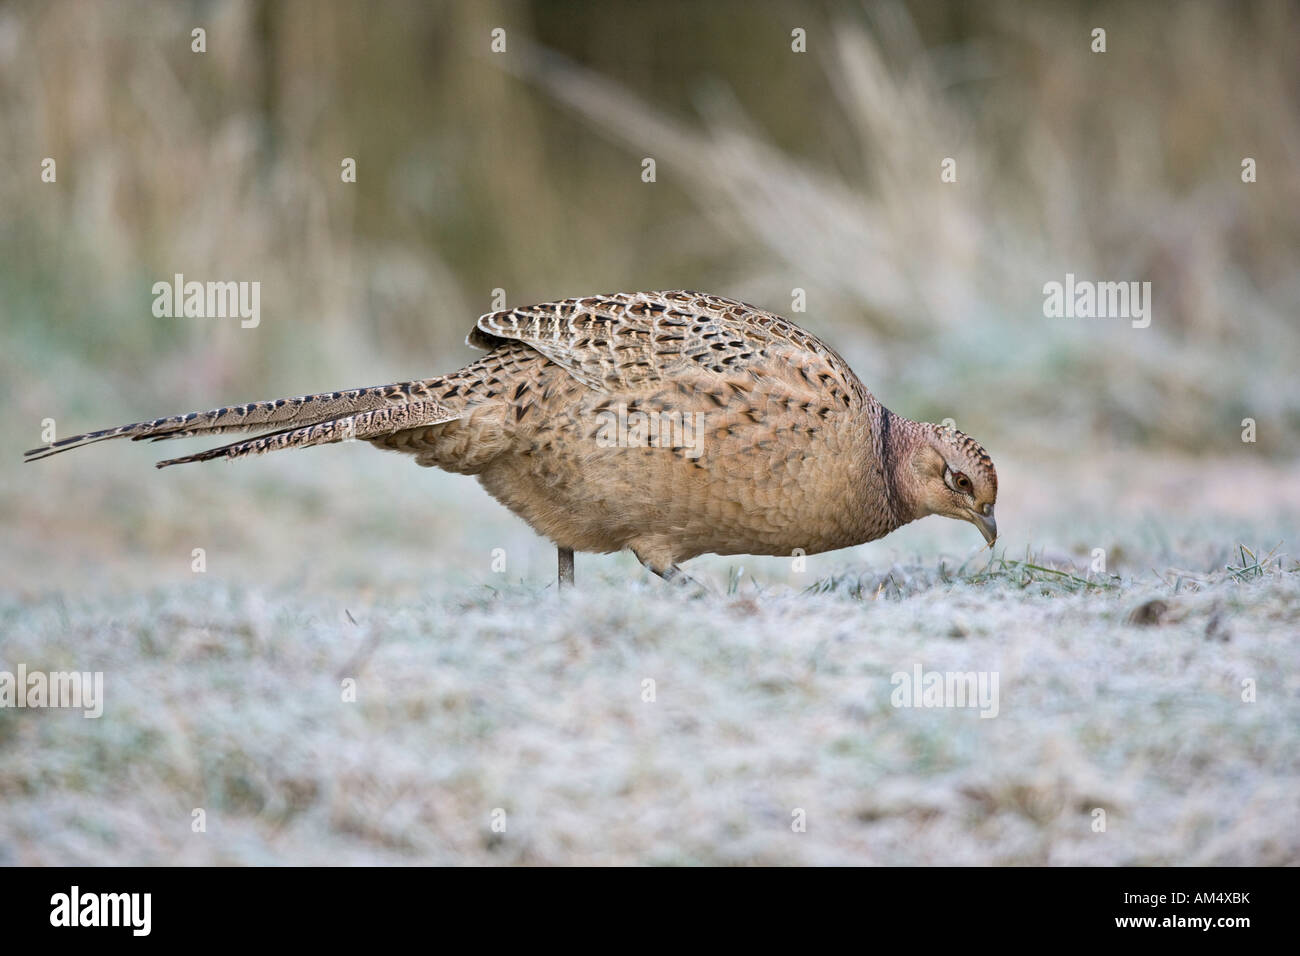 Hen Pheasant Phasianus colchicus standing looking alert Potton Bedfordshire on frosty morning Stock Photo